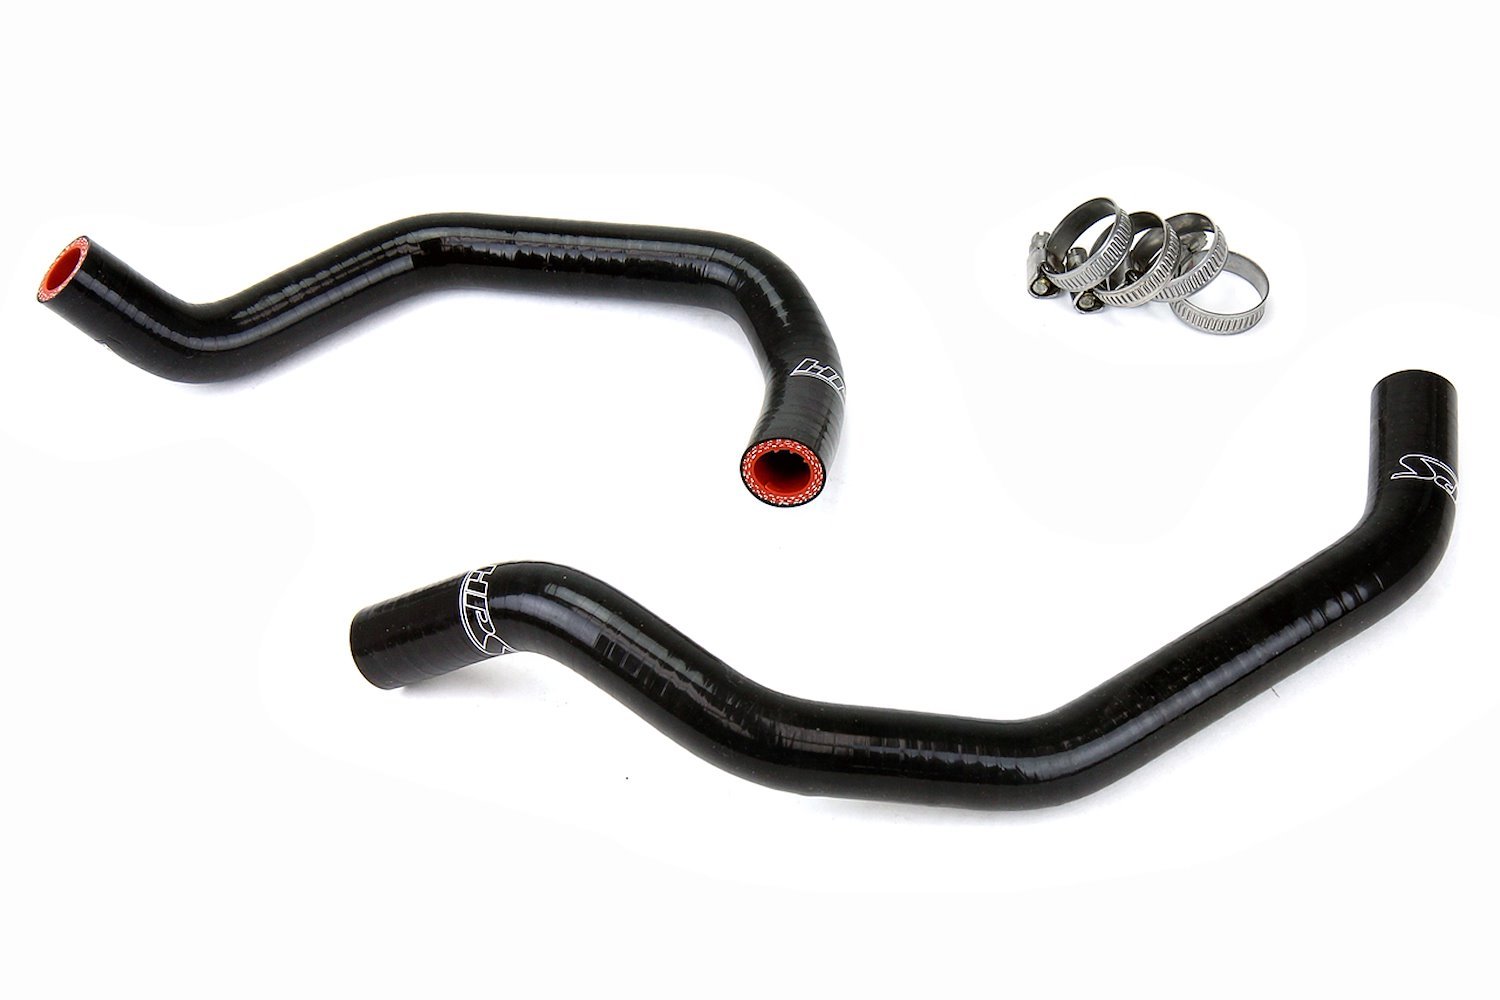 57-1342-BLK Heater Hose Kit, High-Temp 3-Ply Reinforced Silicone, Replace OEM Rubber Heater Coolant Hoses